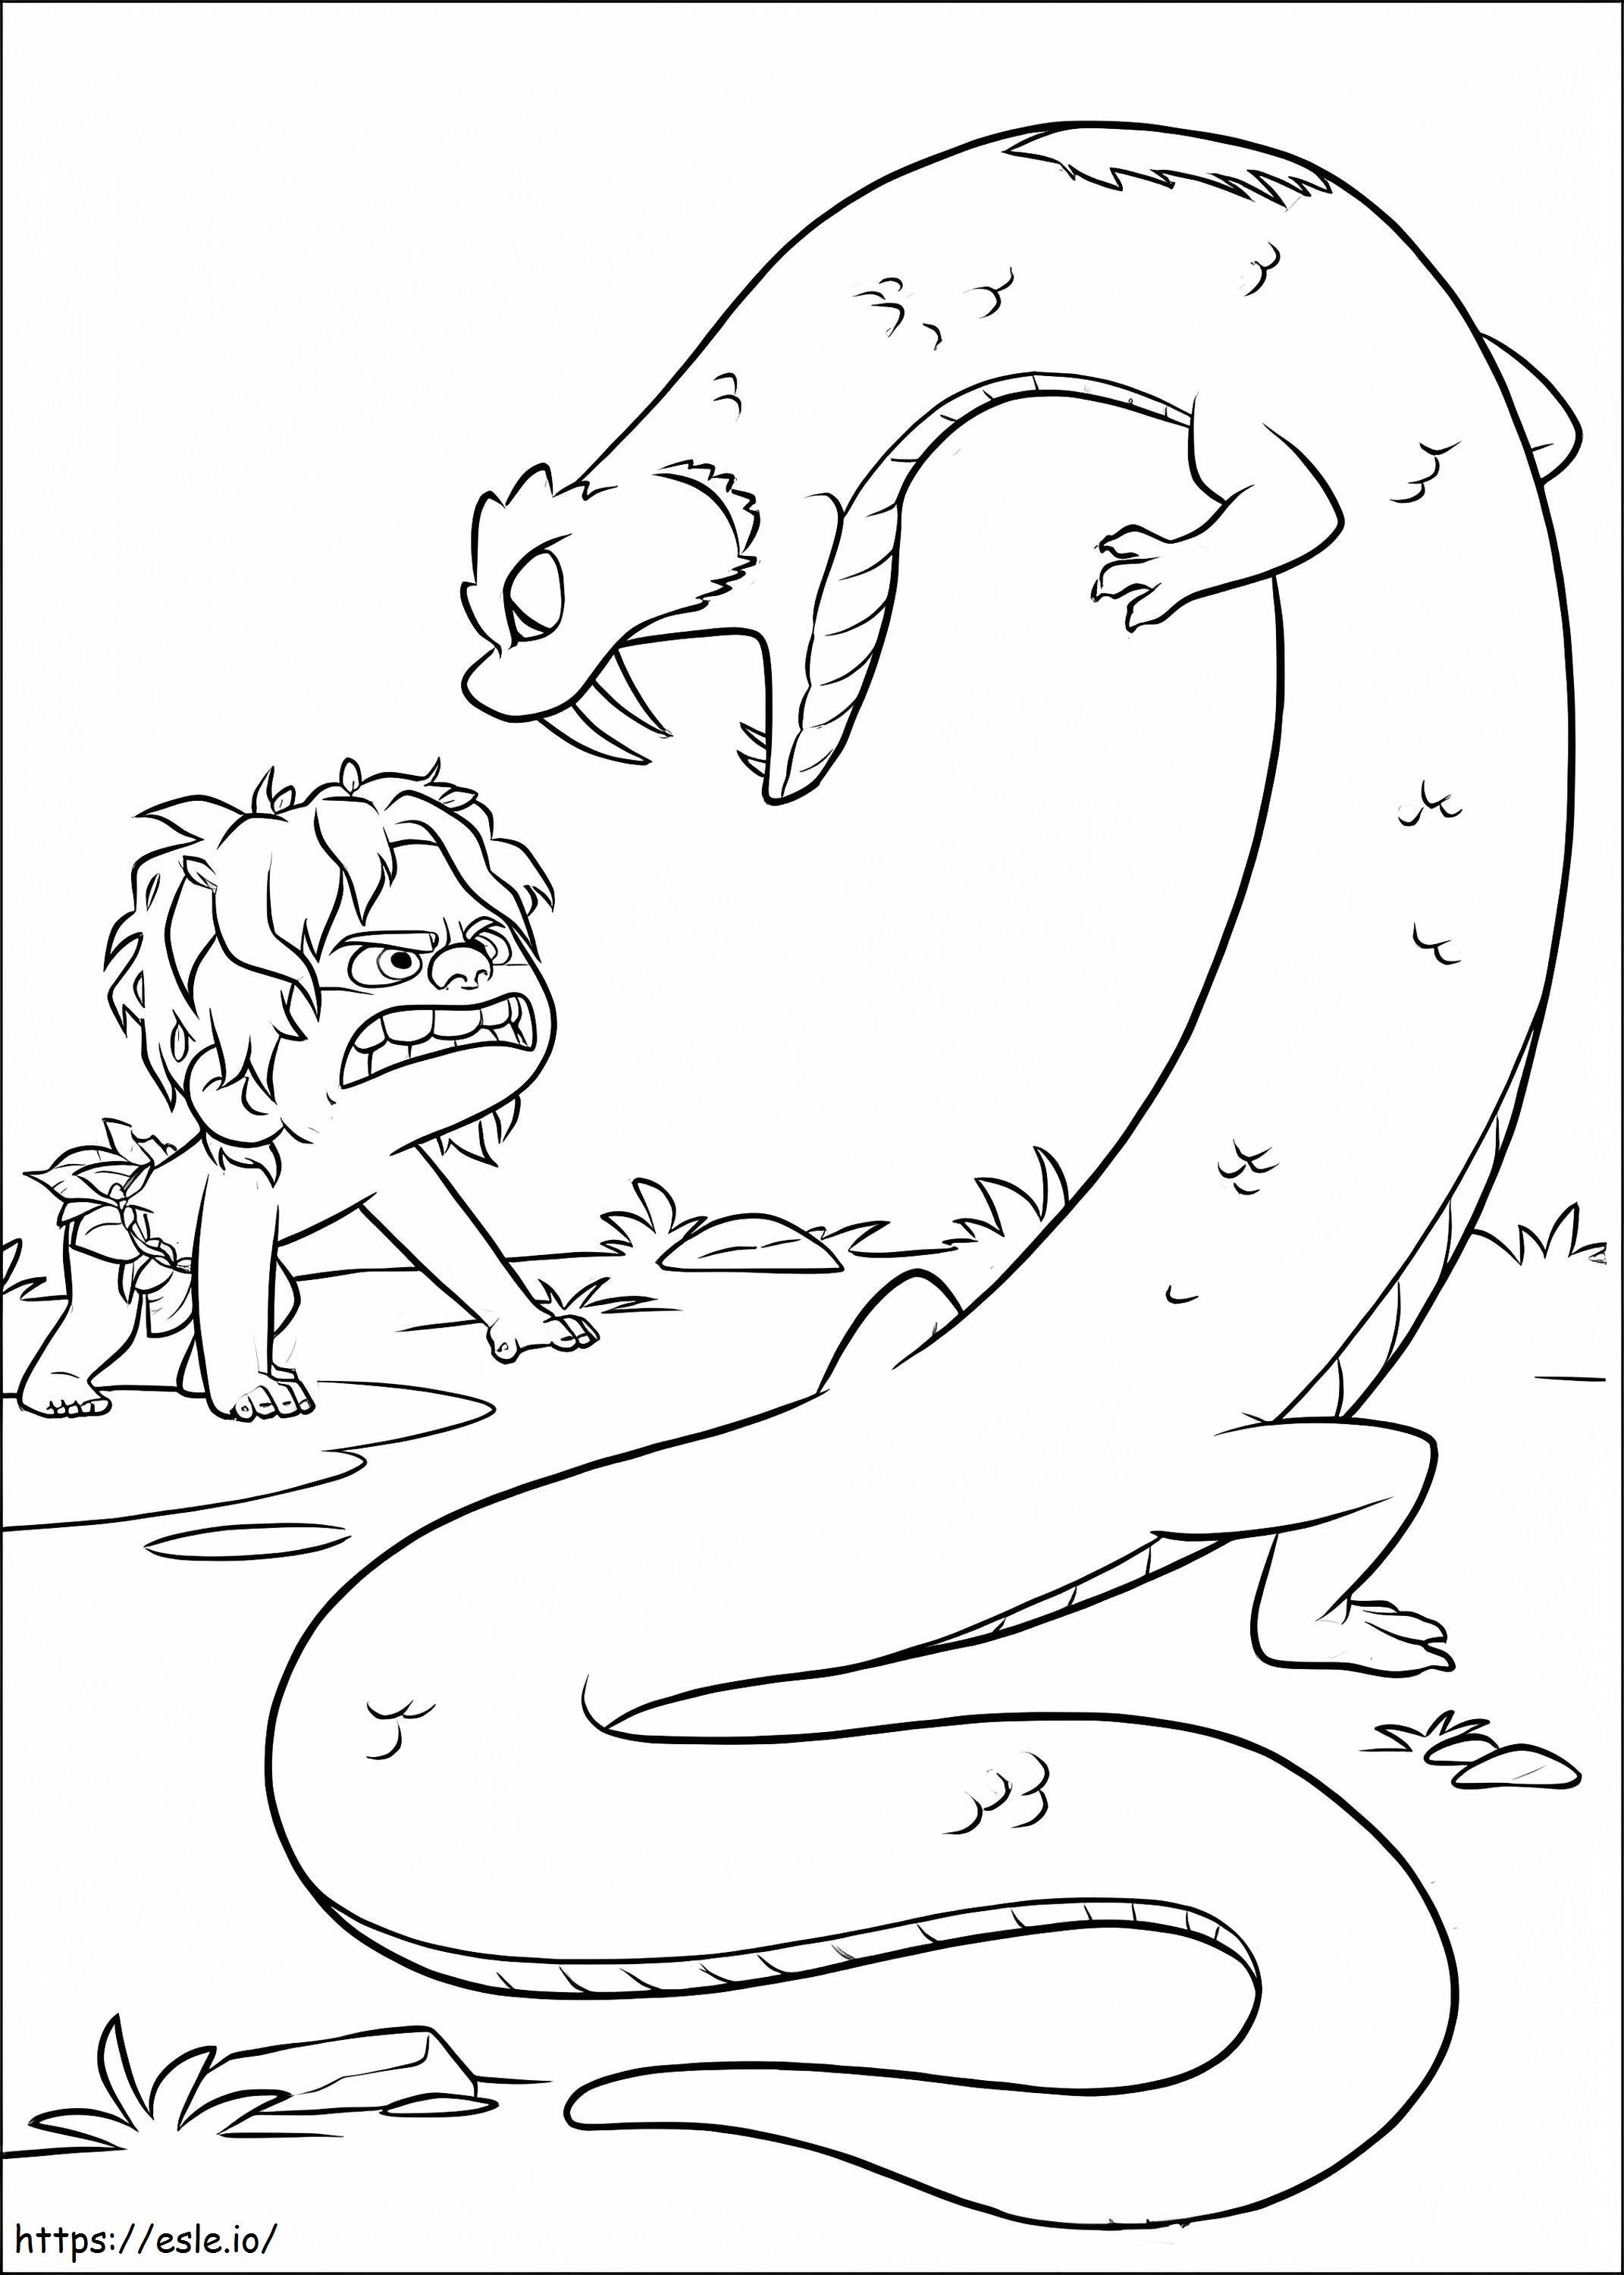 Fight Spot coloring page